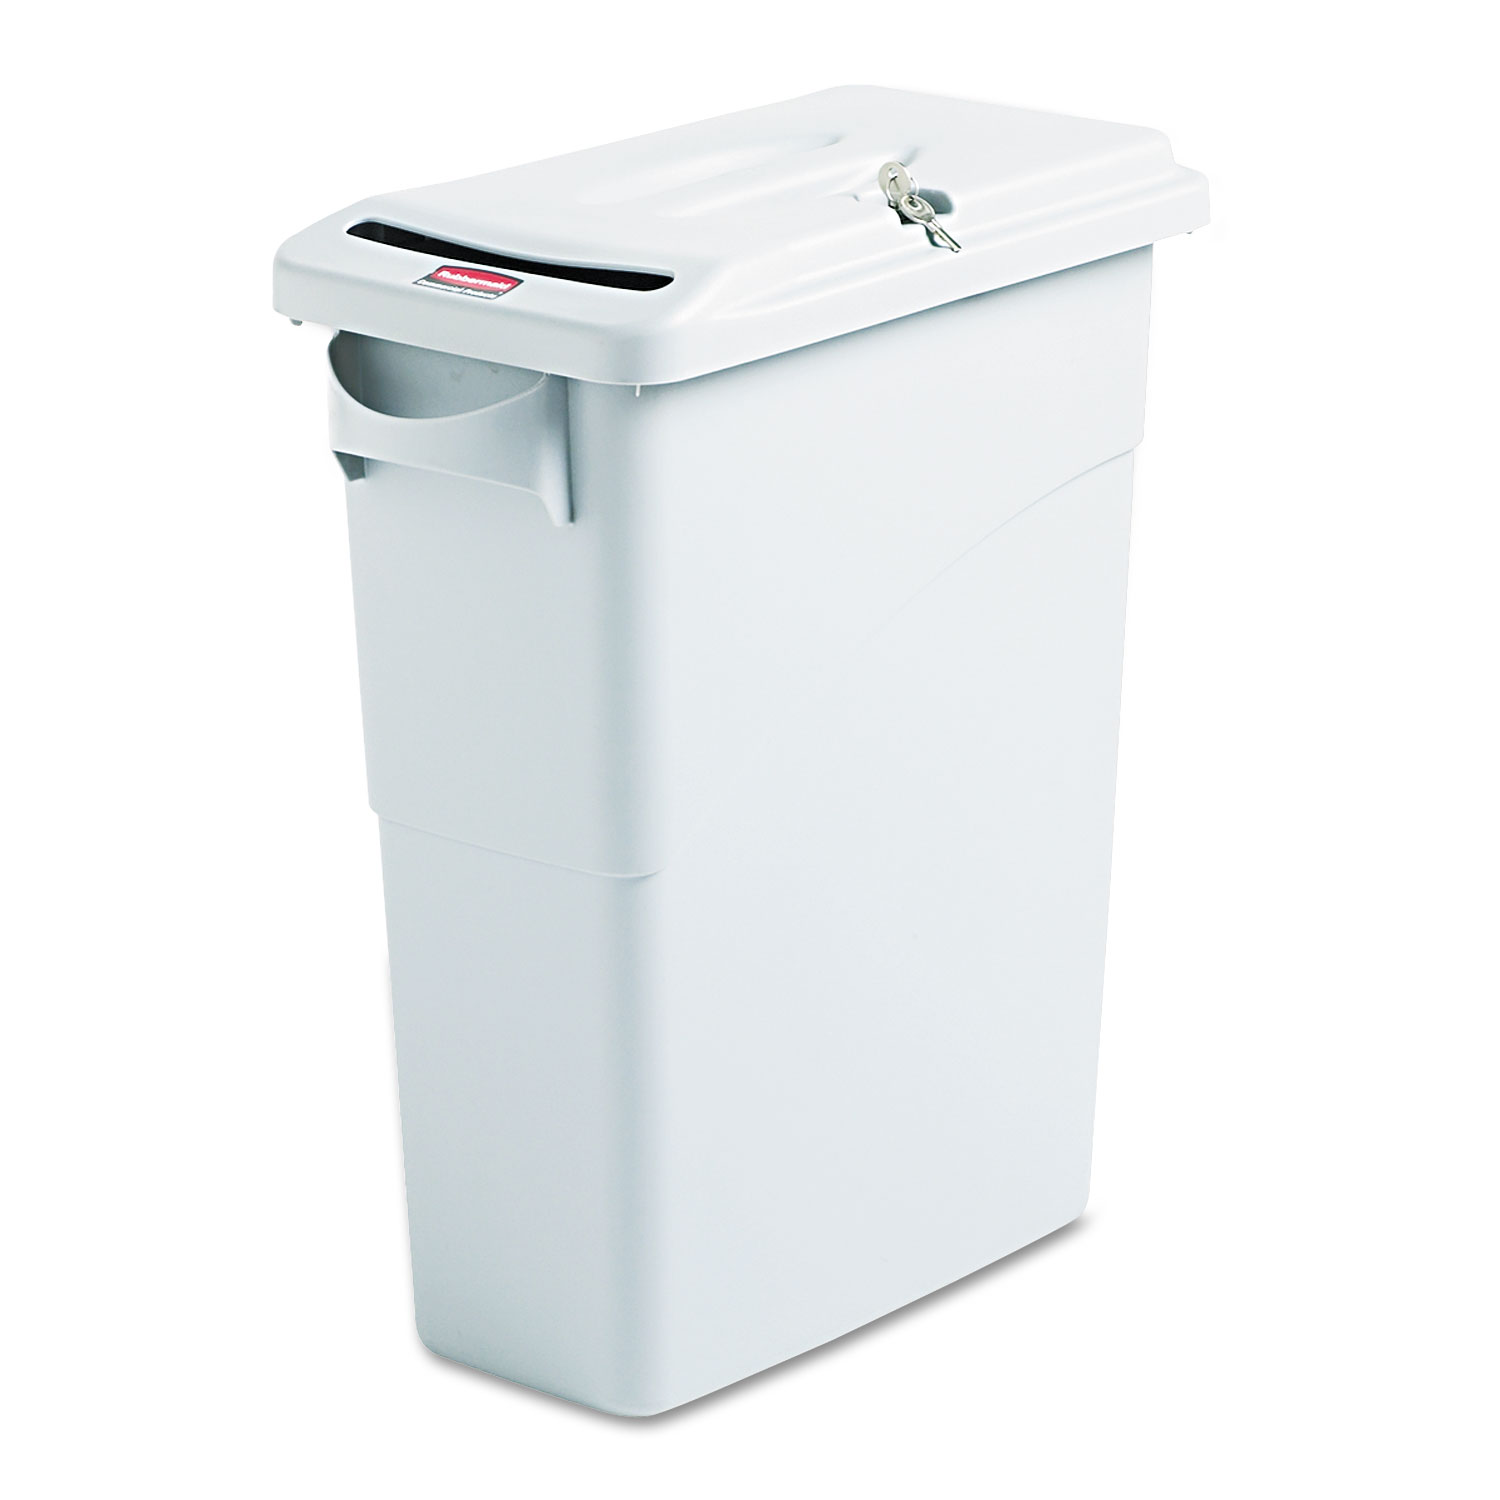  Rubbermaid Commercial FG9W2500LGRAY Slim Jim Confidential Document Receptacle with Lid, Rectangle, 15.88 gal, Light Gray (RCP9W25LGYCT) 